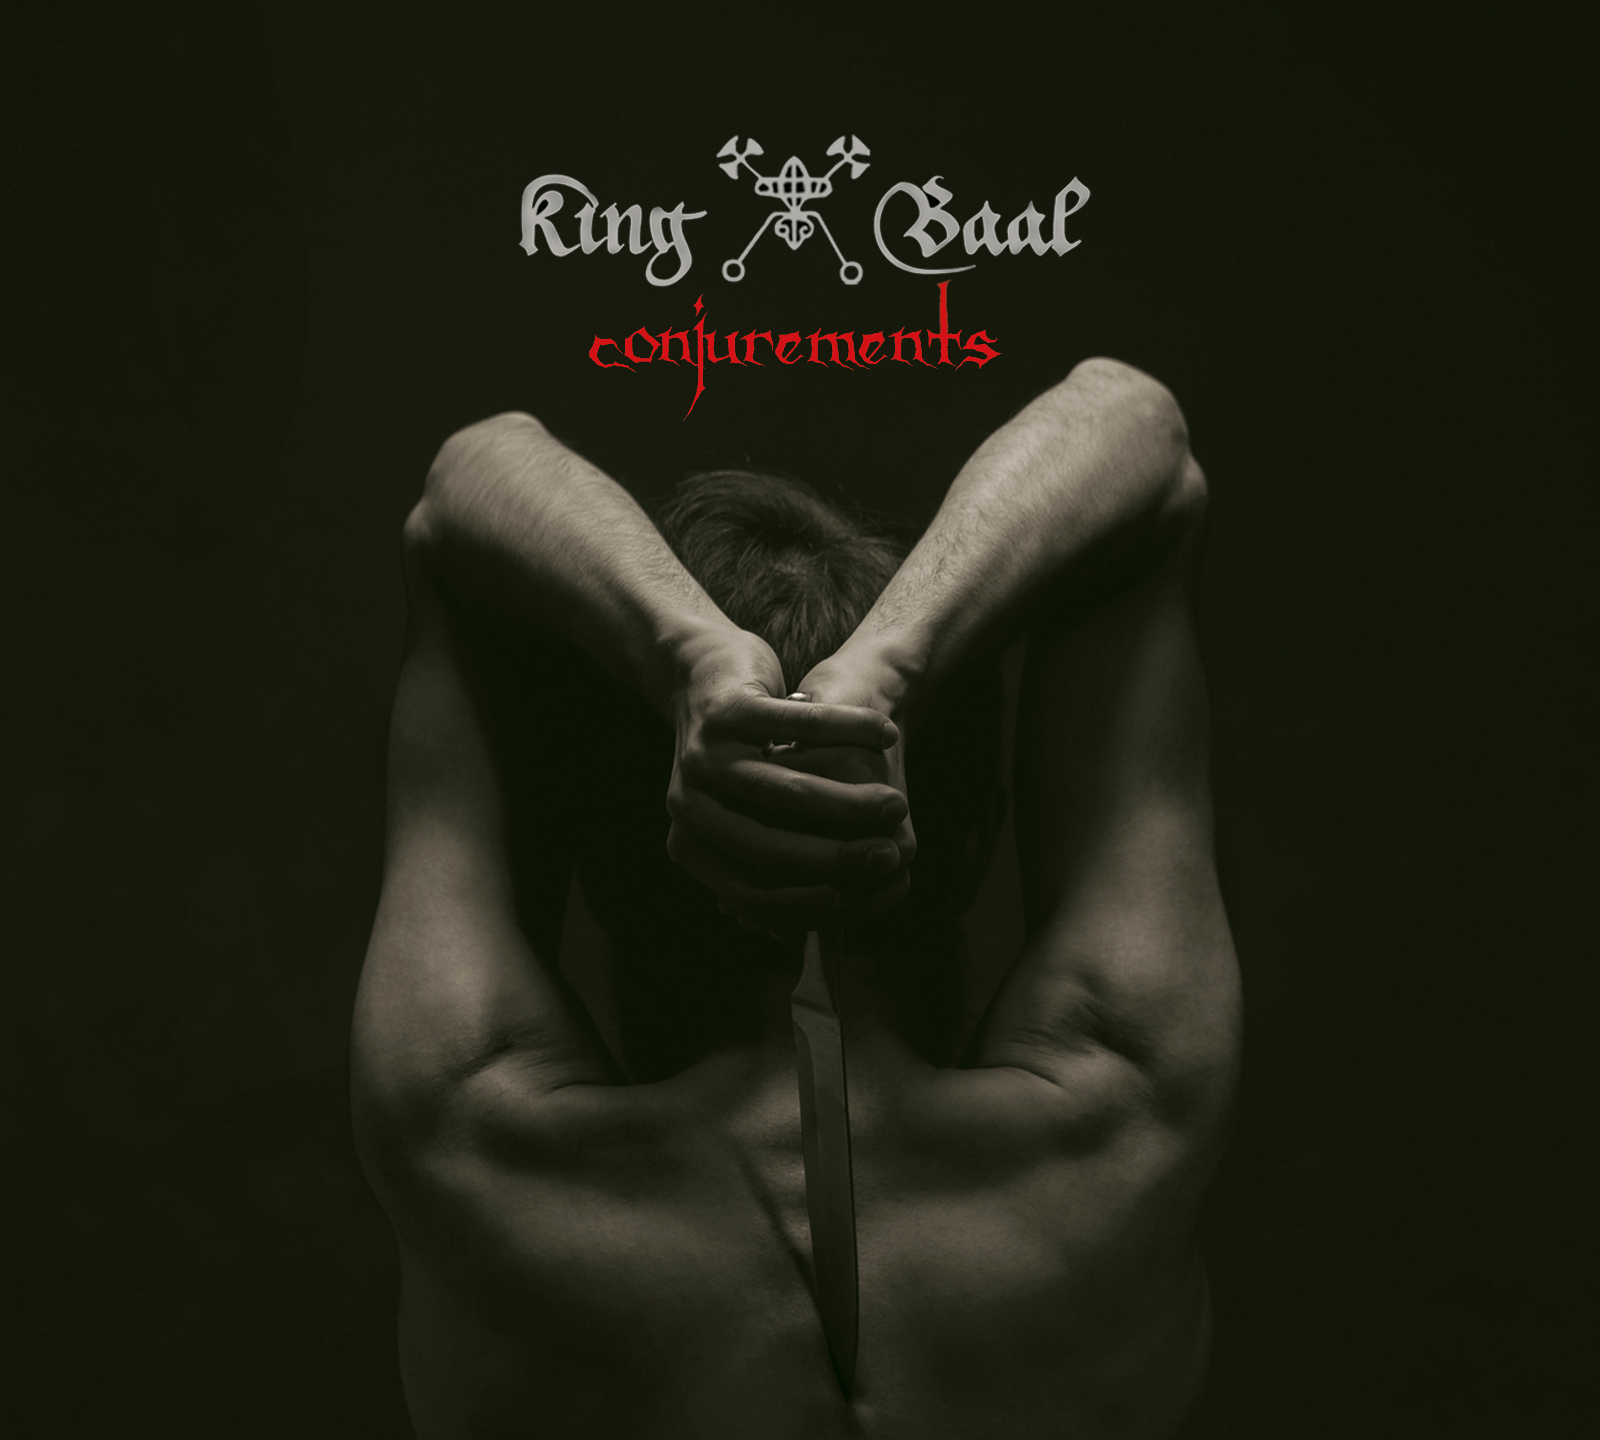 ALBUM REVIEW: King Baal - Conjurements 